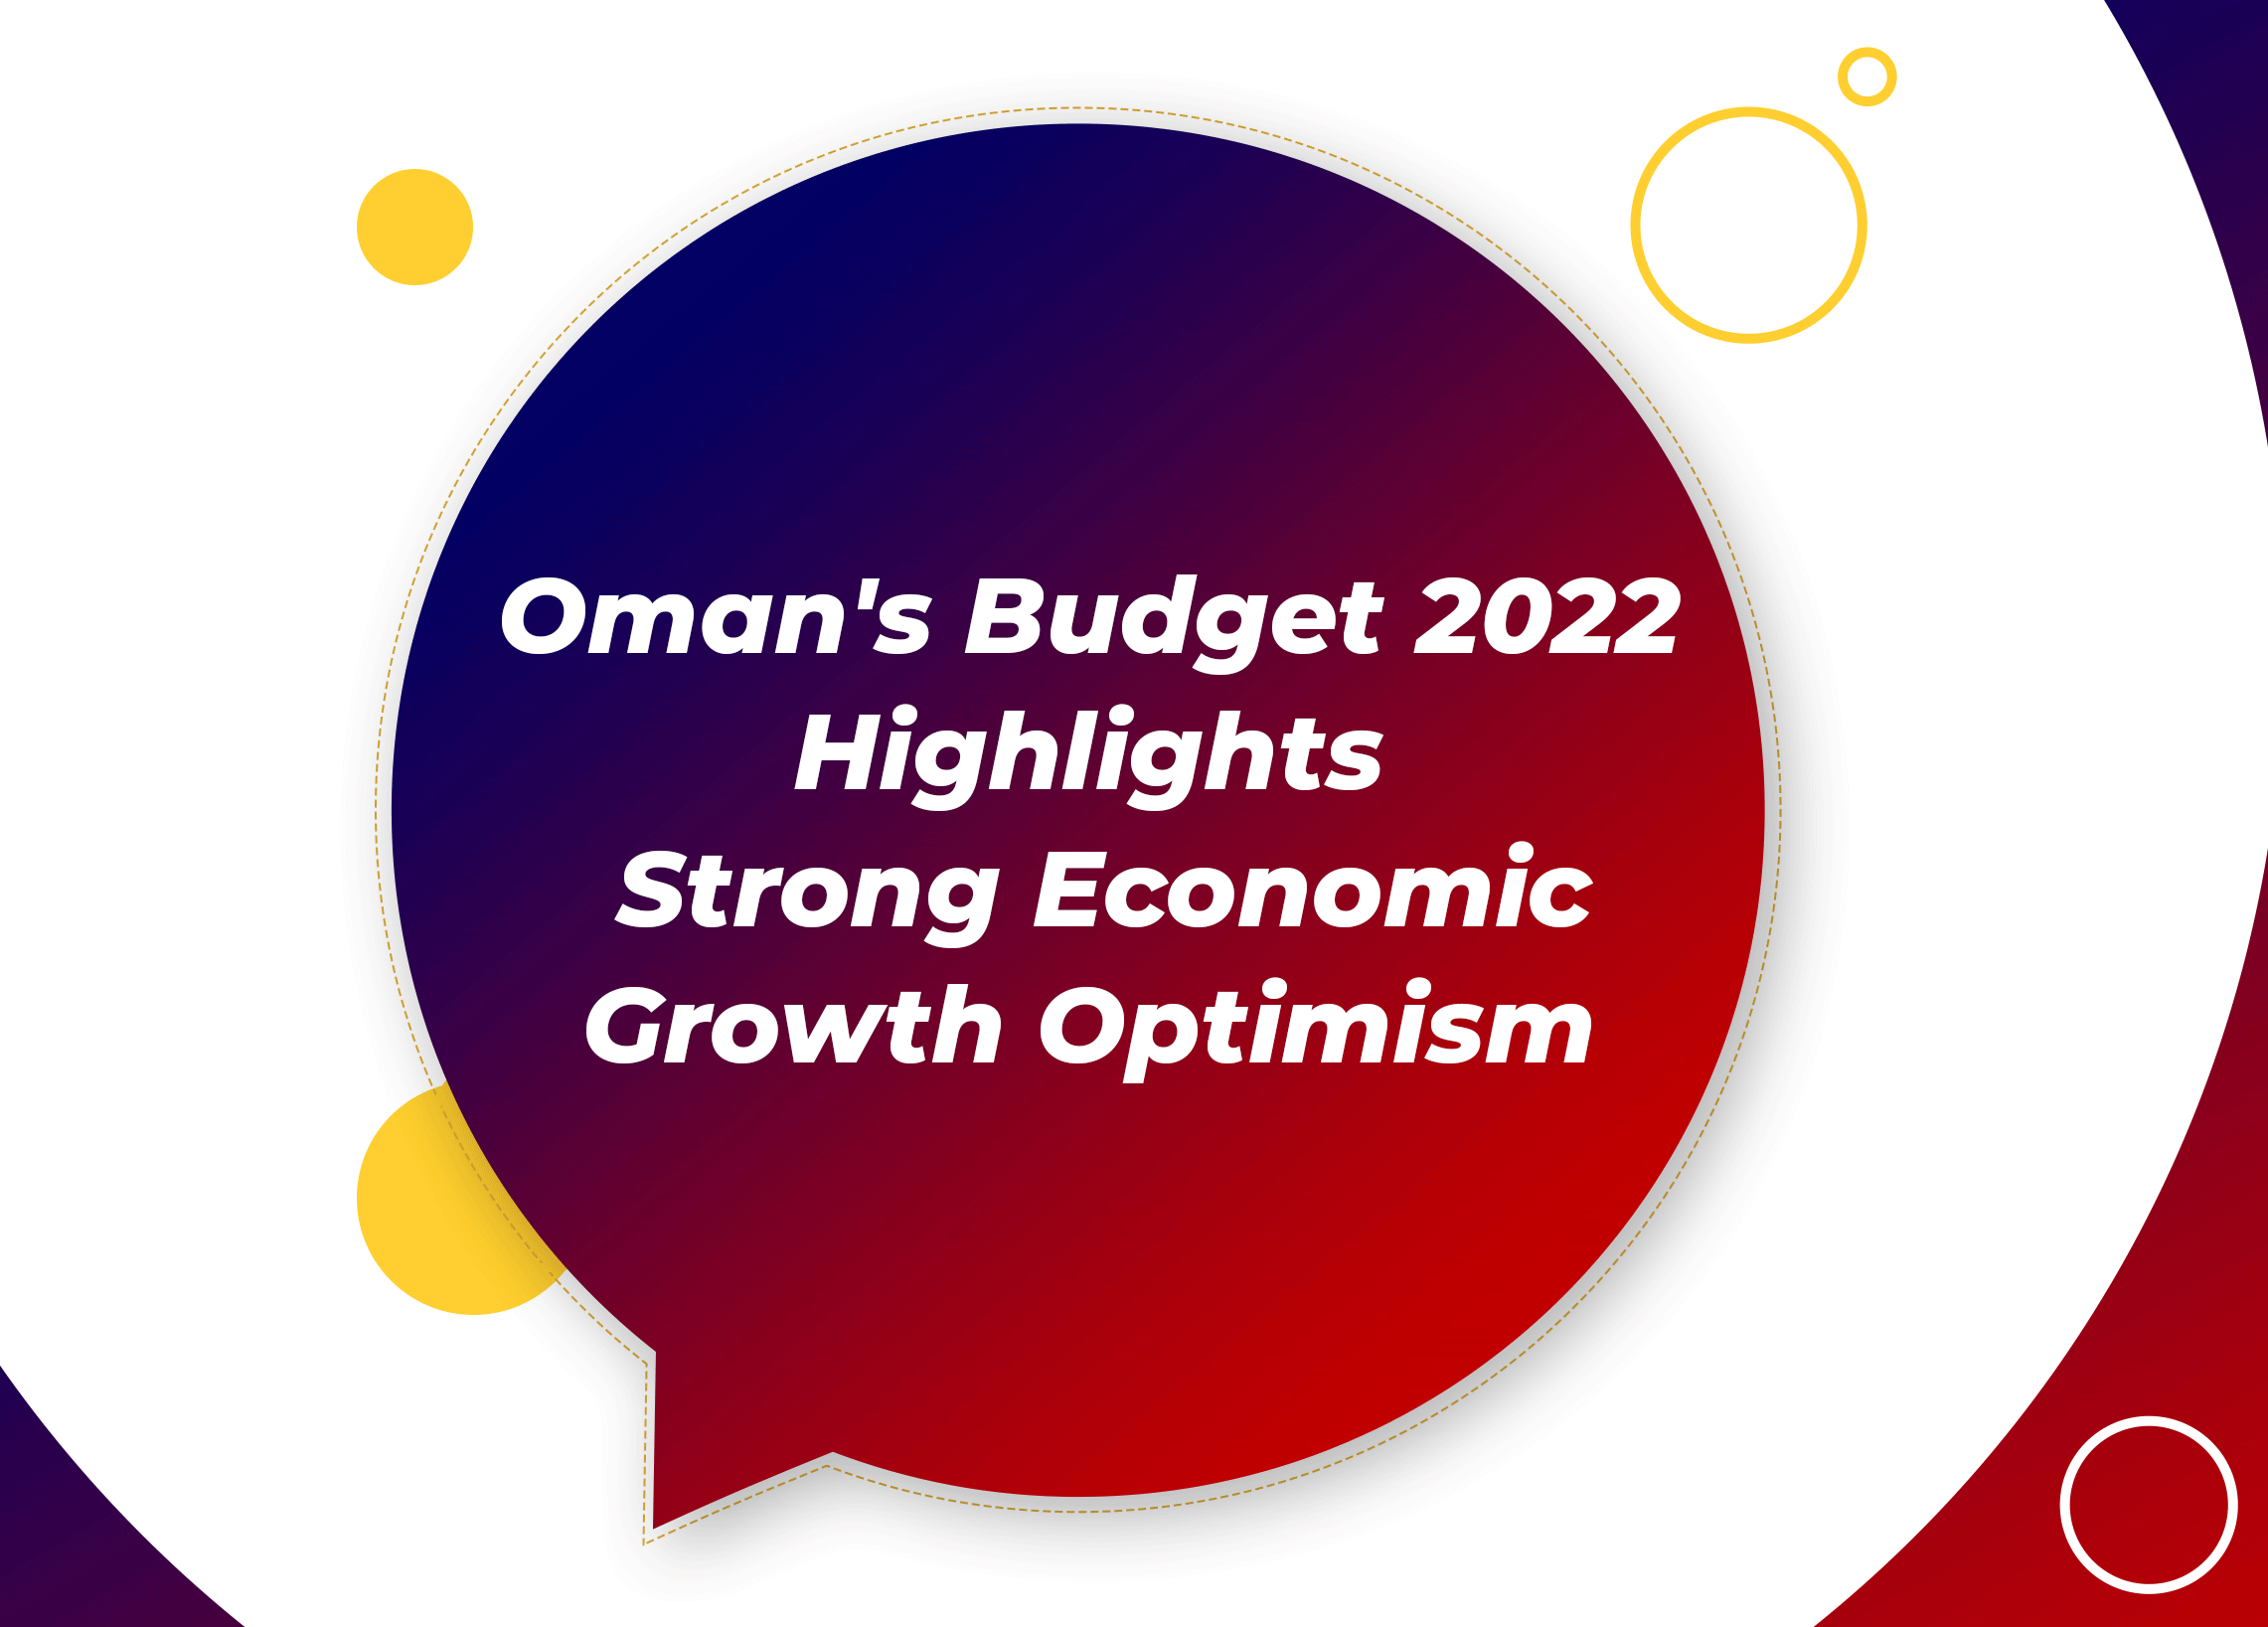 Oman's Budget 2022 Highlights Strong Economic Growth Optimism